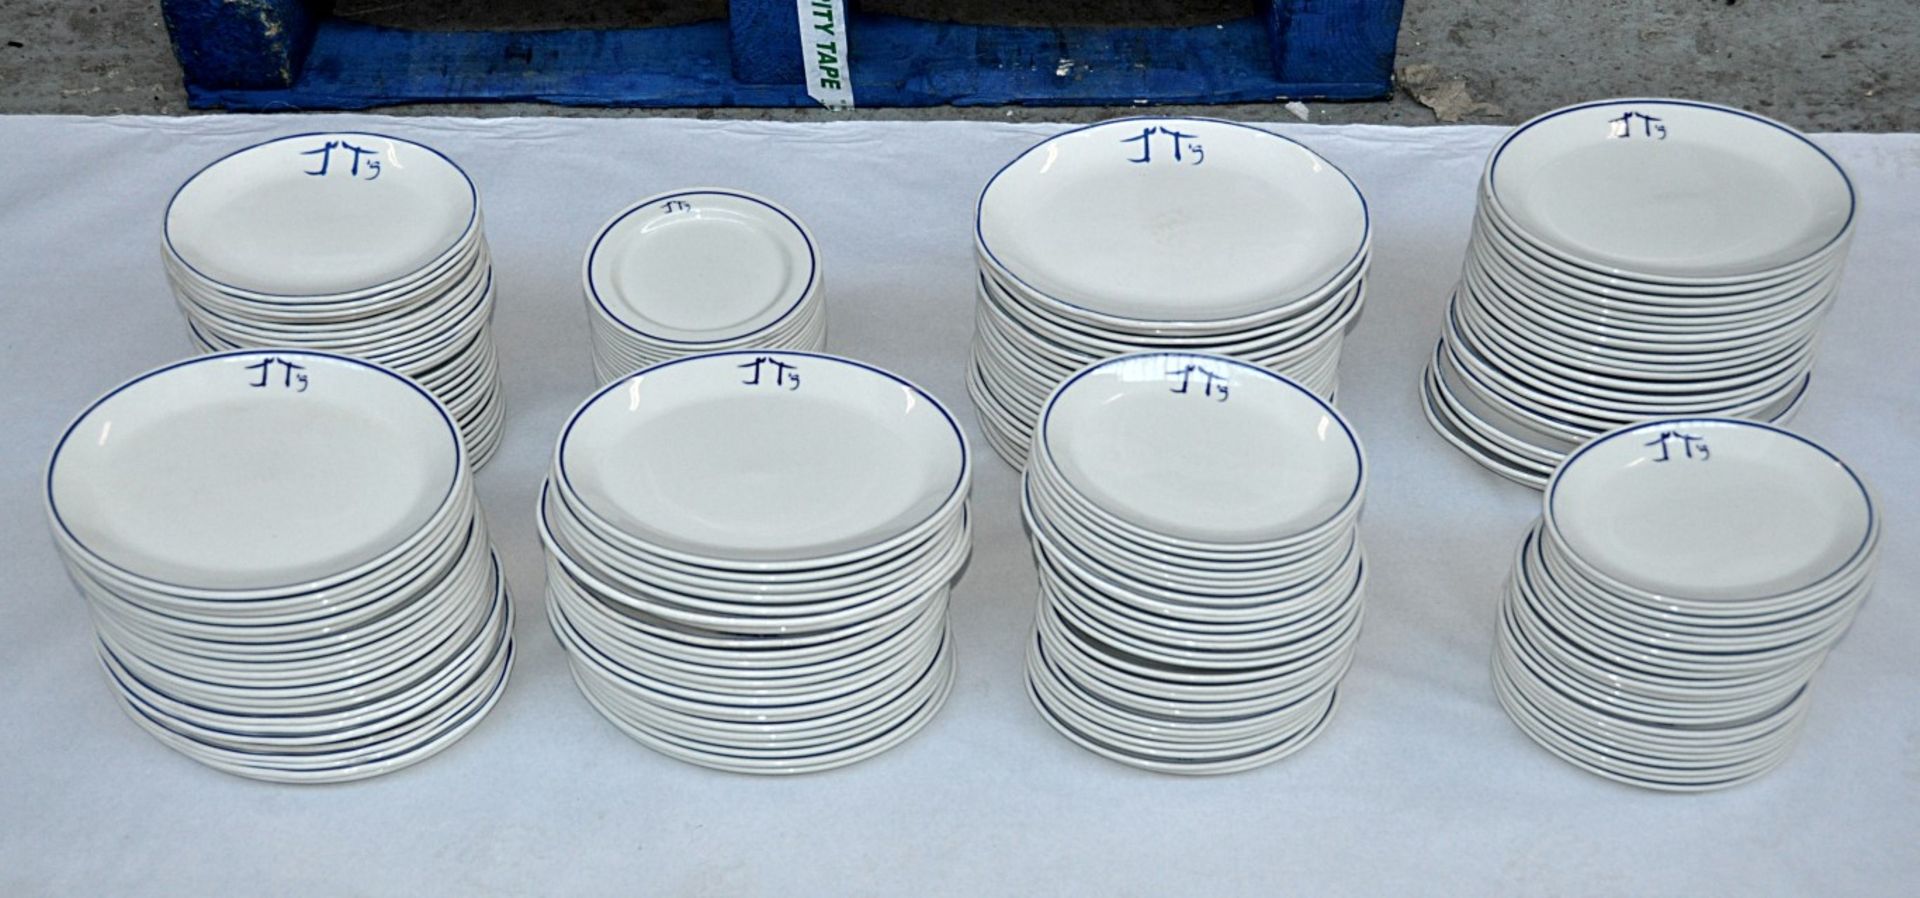 195 x Item Of Assorted Crockery – Brand: Steelite Int. (Endland) – Includes Dishes Of Varying Size –